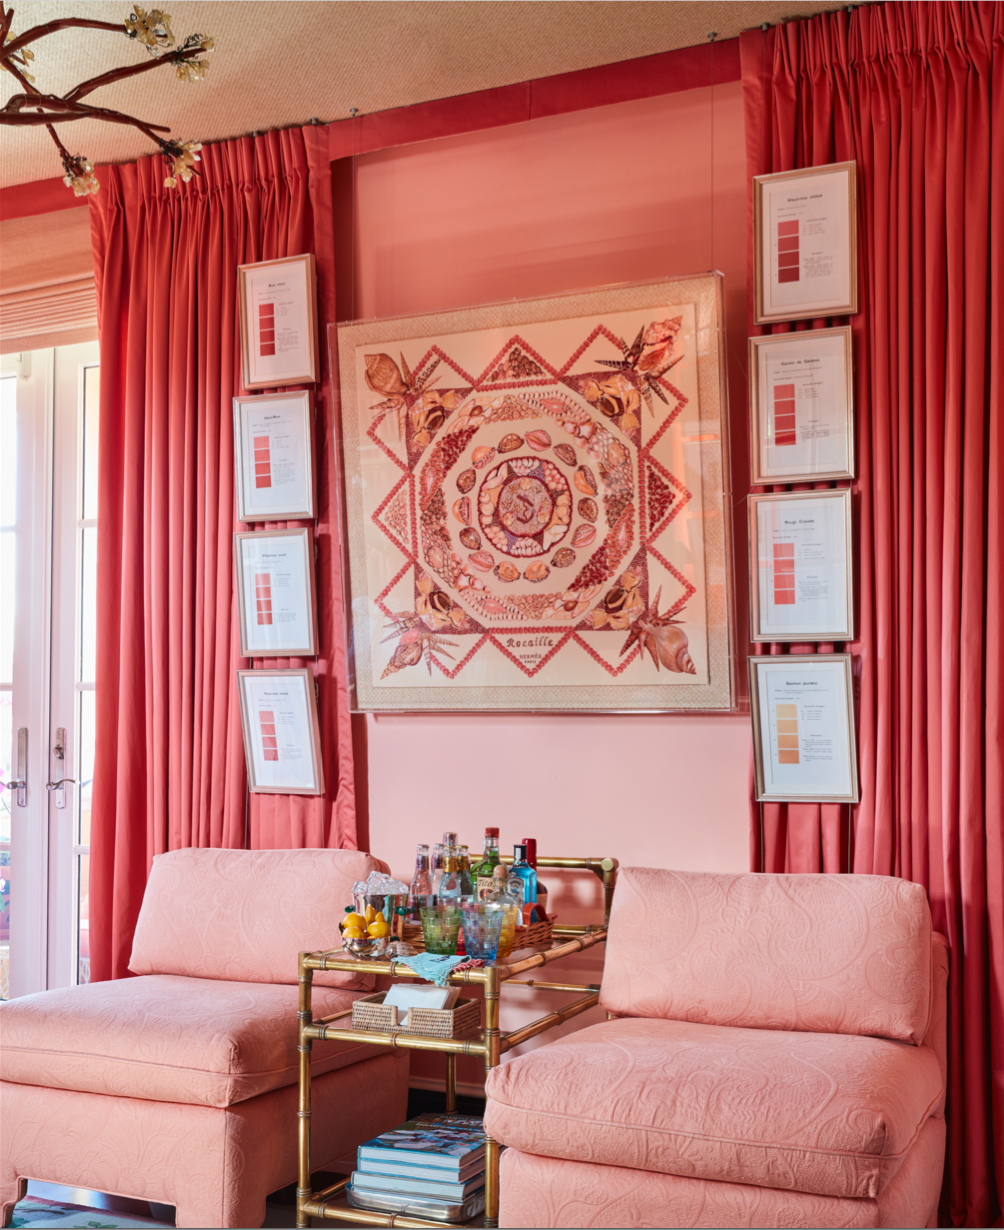 Hermès Framed Scarves, Pillows & Inspired Wall Art, Trays and More! | The Well Appointed House ...